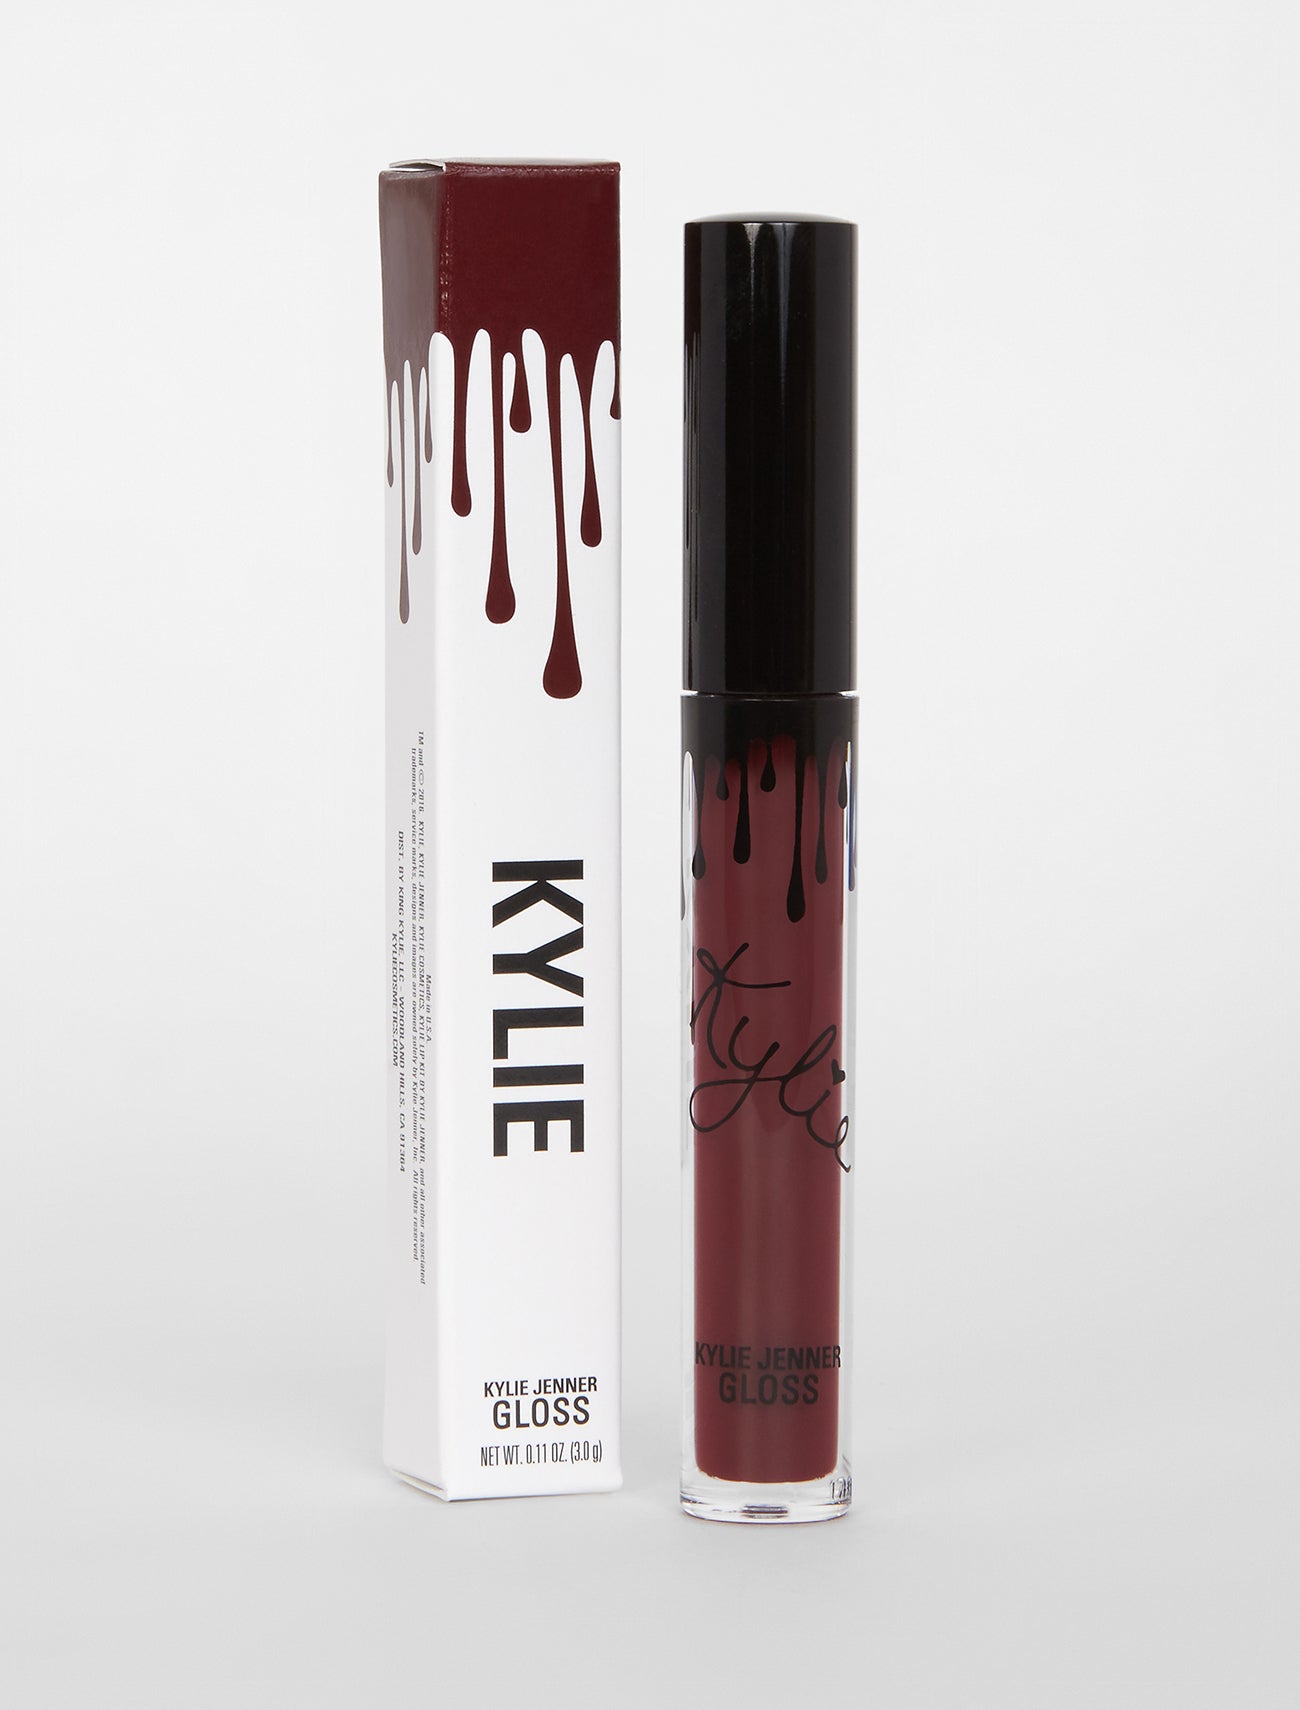 Black ladies gloss kylie kit high pictures jenner